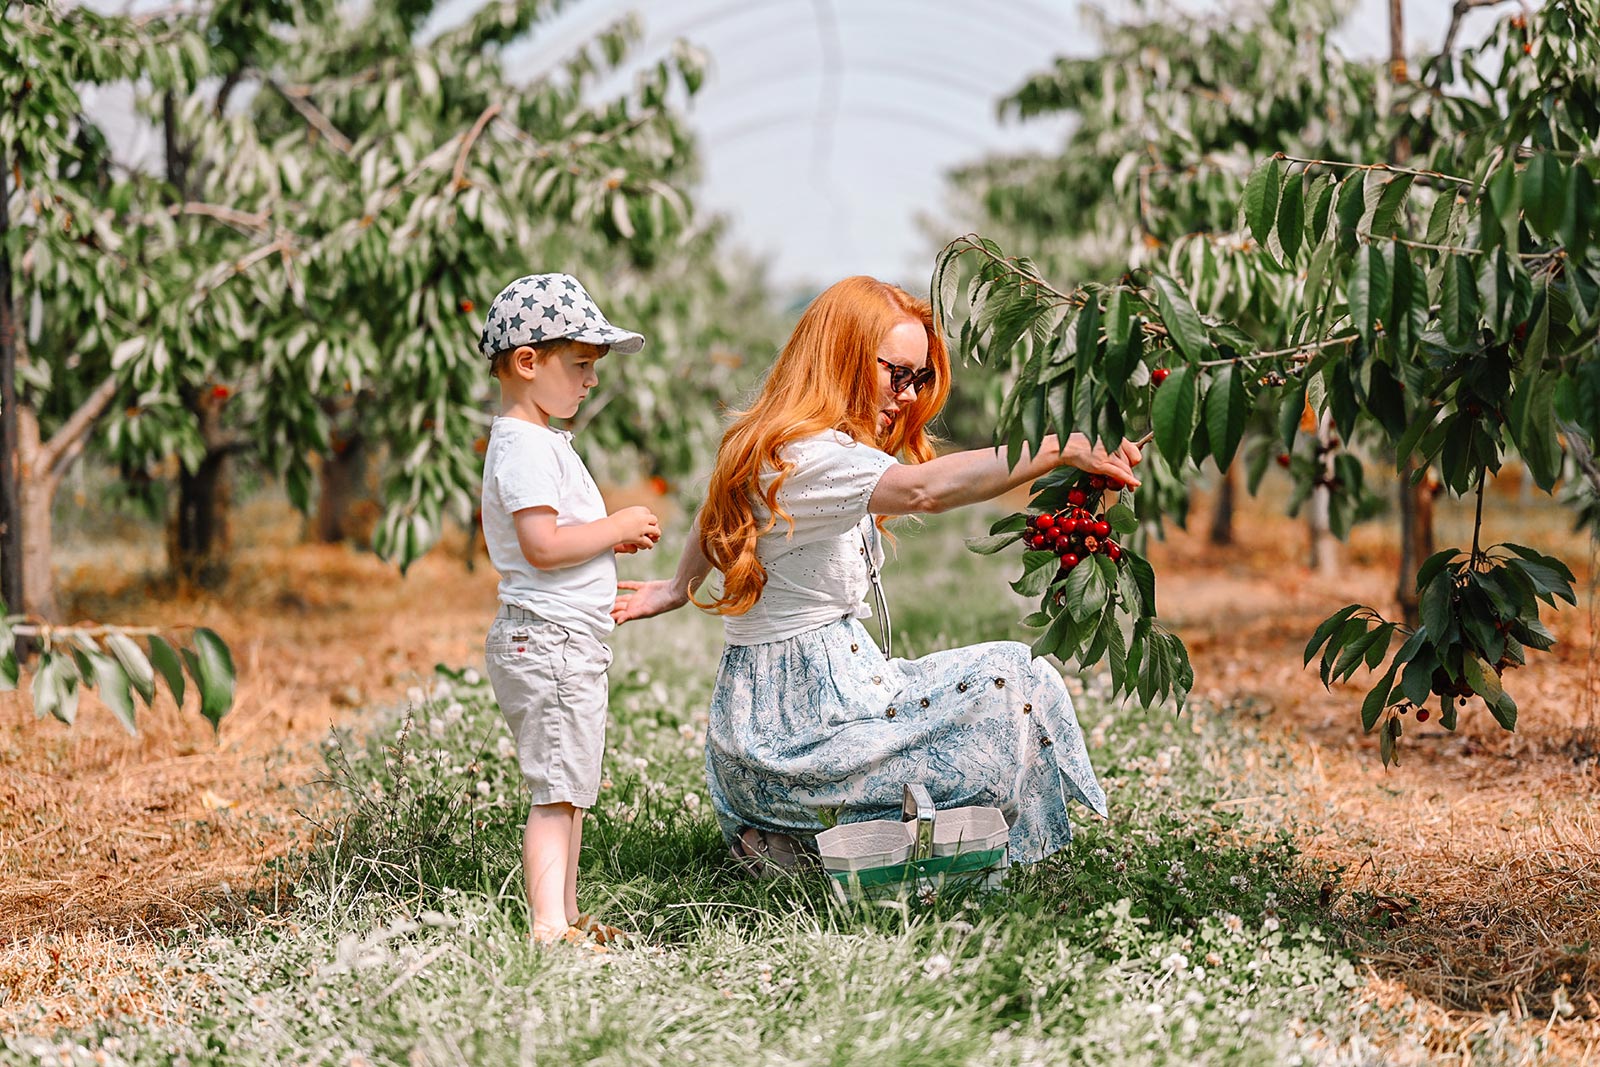 Amber and Max picking cherries on a sunny day at the farm